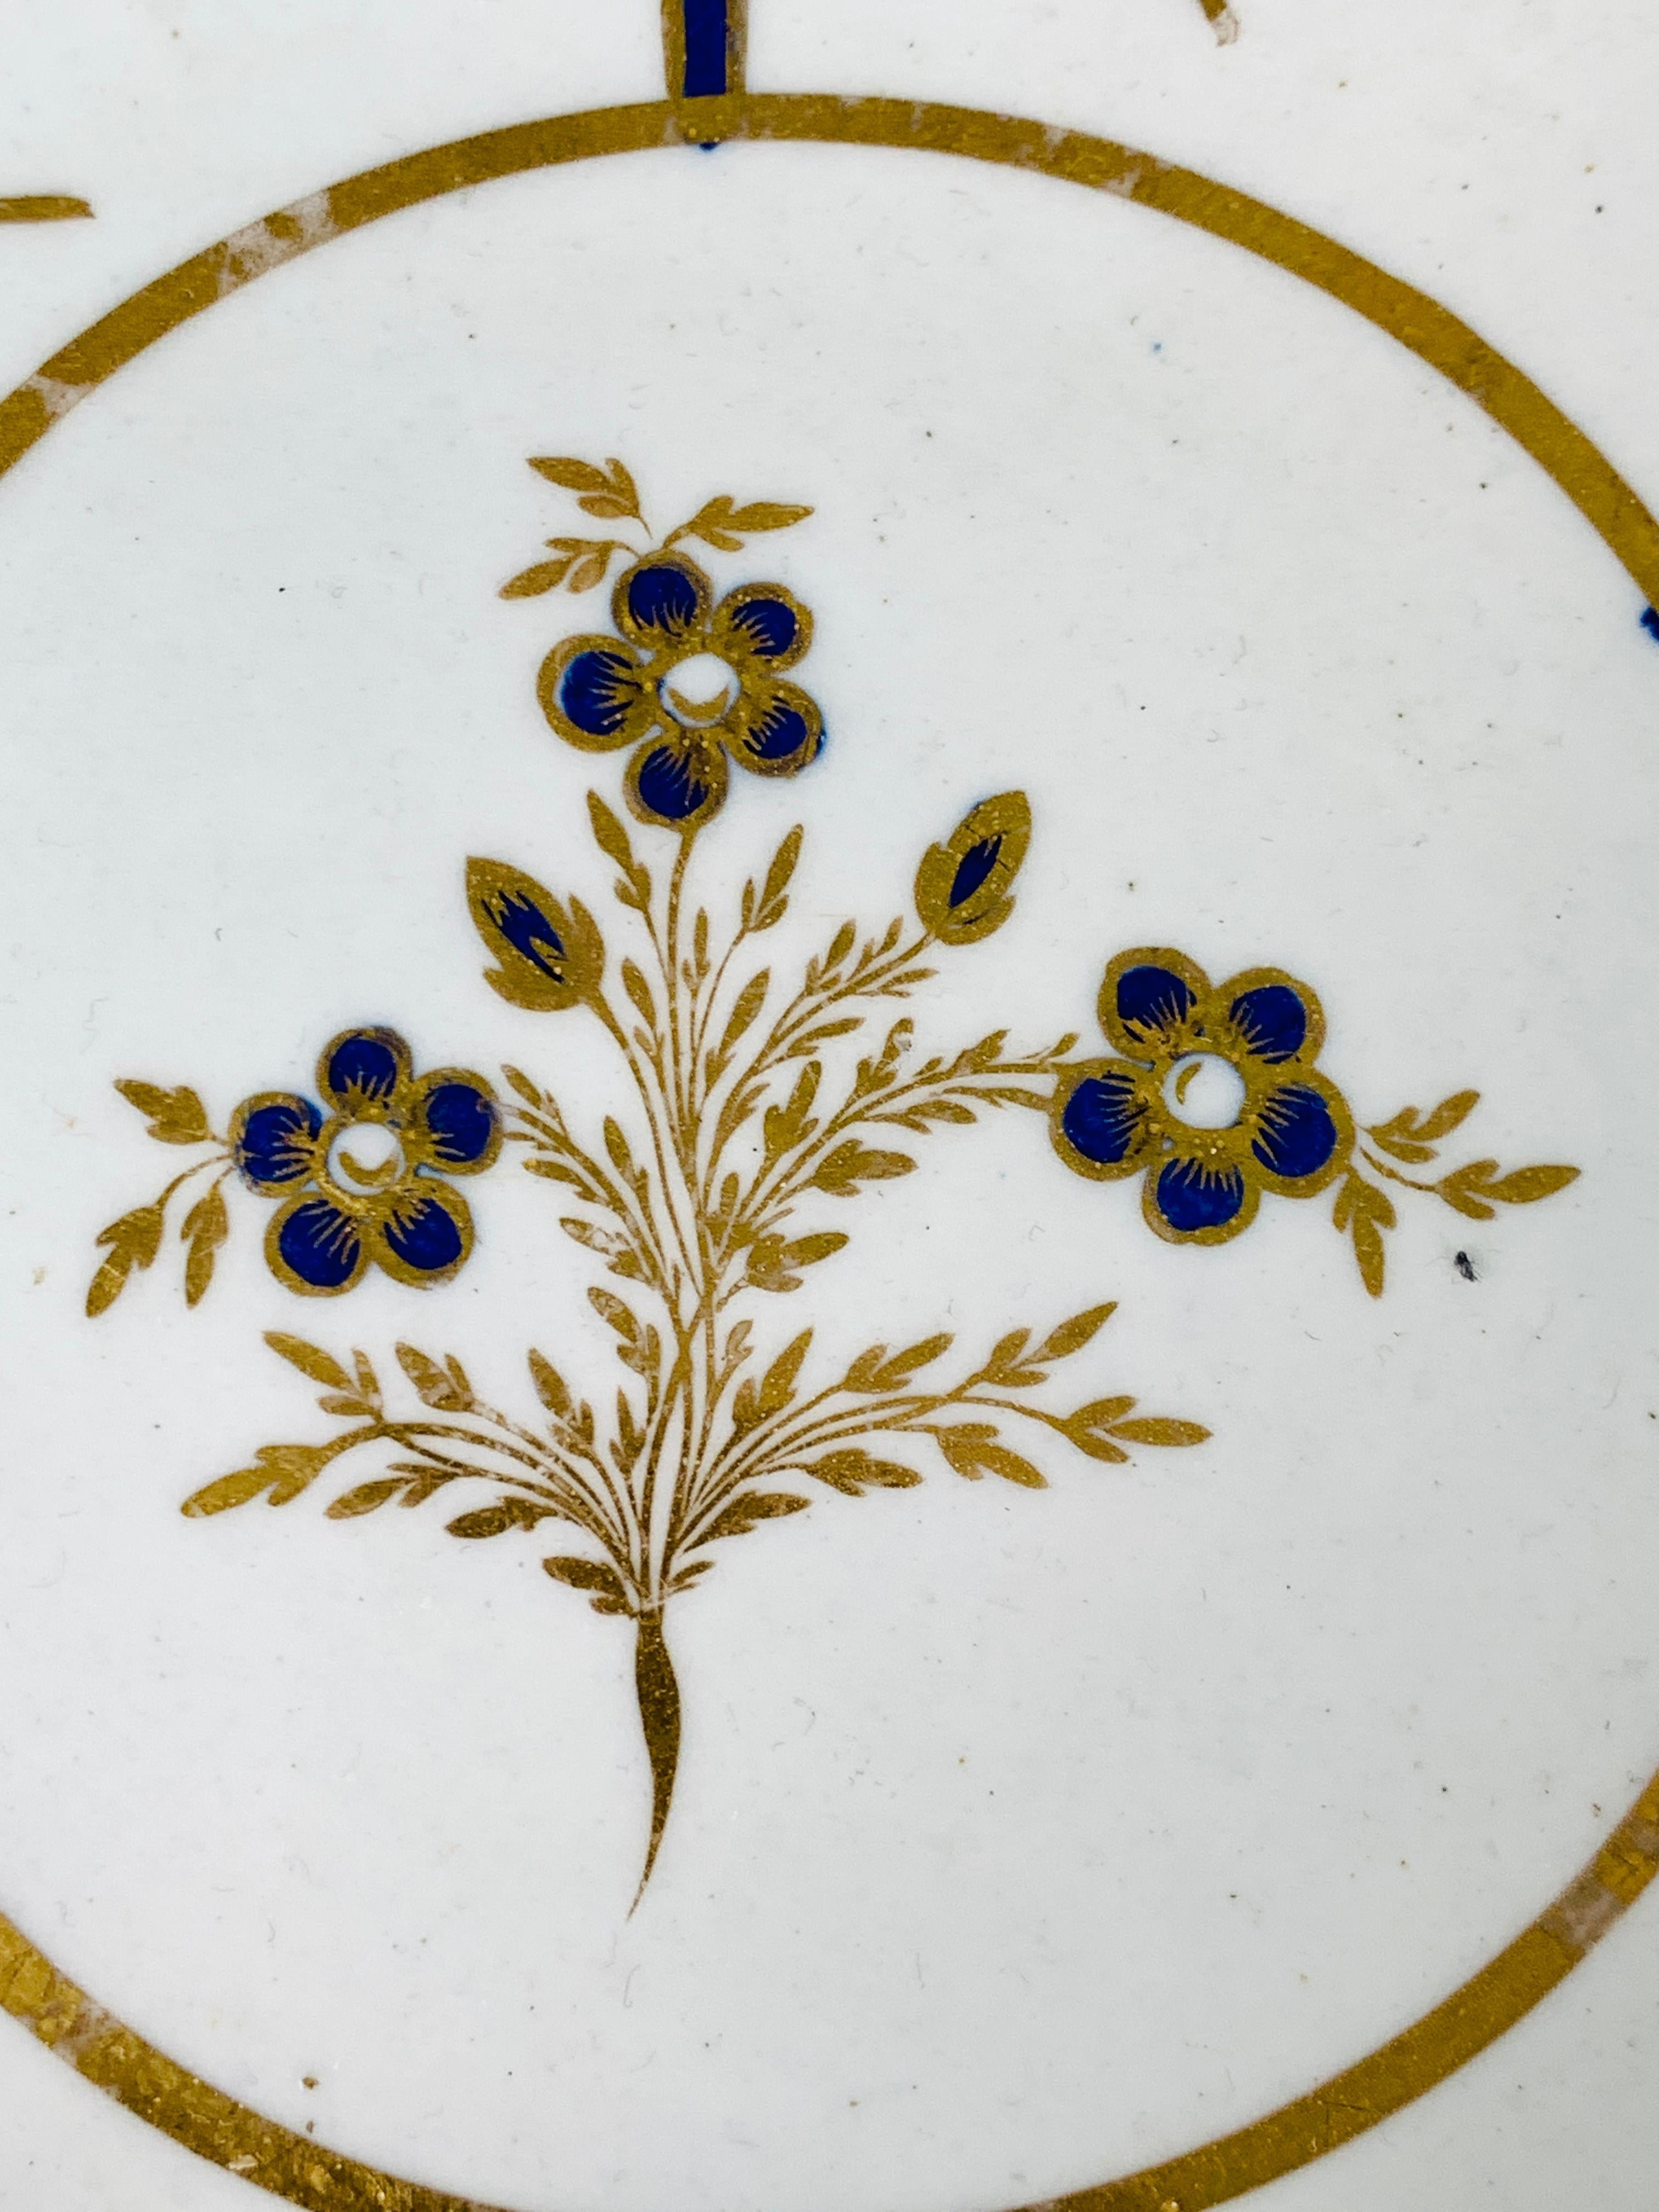 George III Hand-Painted Antique Blue & Gold English Porcelain Dish 18th Century c-1780 For Sale